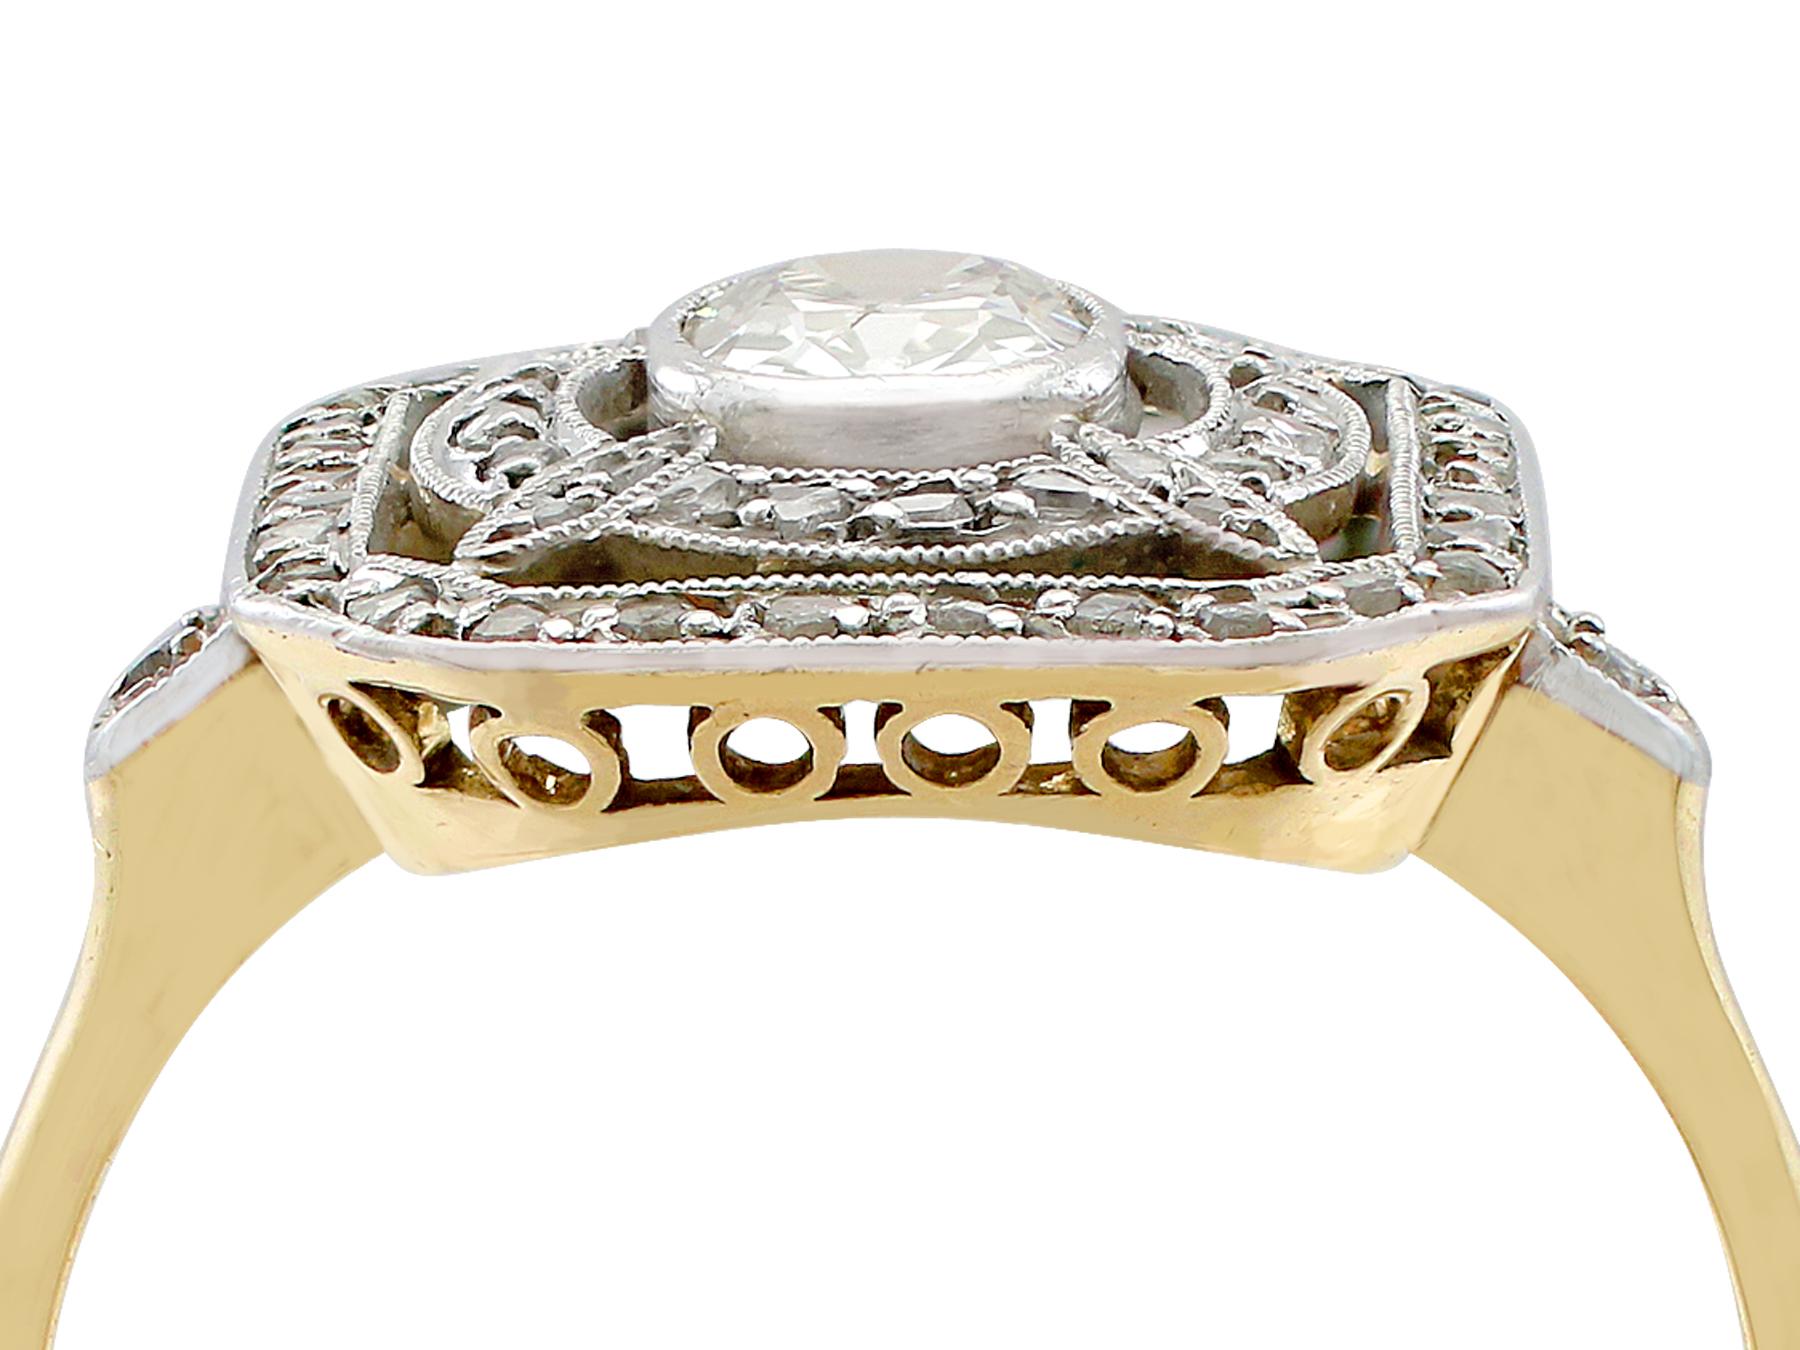 A stunning, fine and impressive 1.01 carat diamond and 18 karat yerllow gold, platinum set ring; part of our diverse antique jewellery and estate jewelry collections.

This stunning, fine and impressive antique diamond dress ring has been crafted in